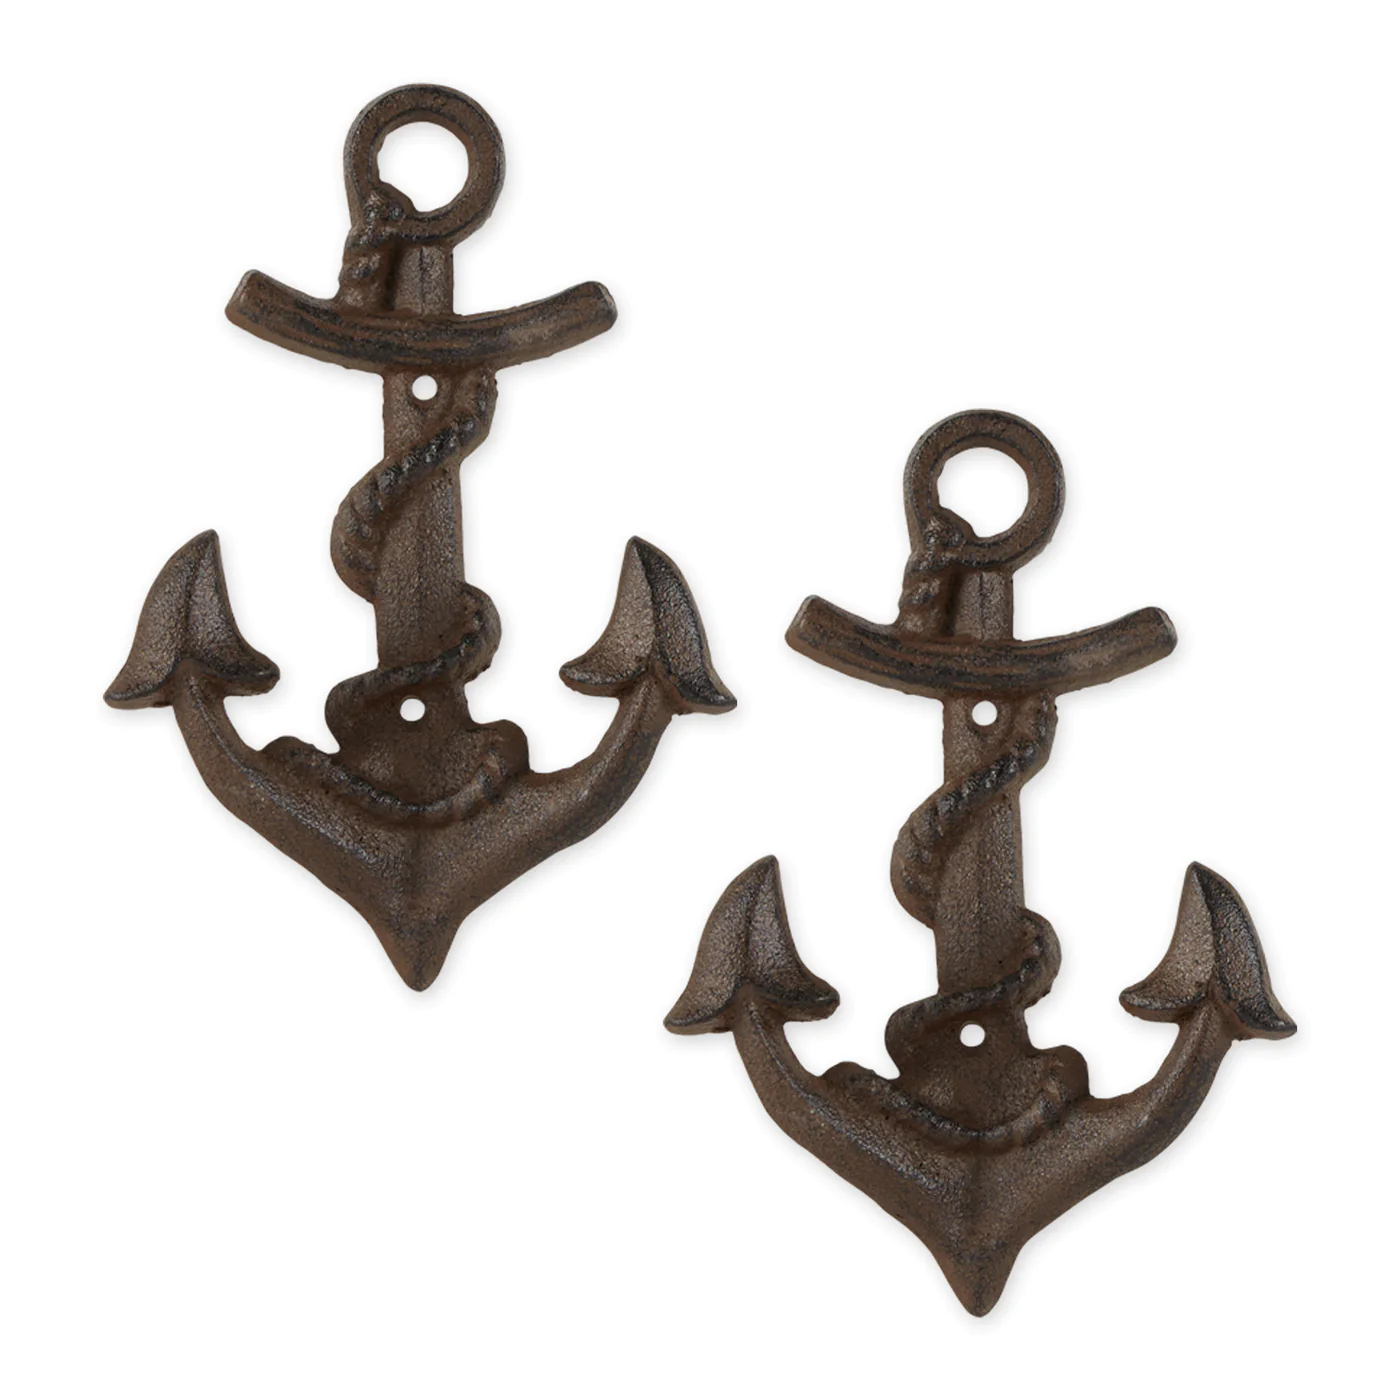 Anchor with Rope WQALL Hook SET/2 - $25.78